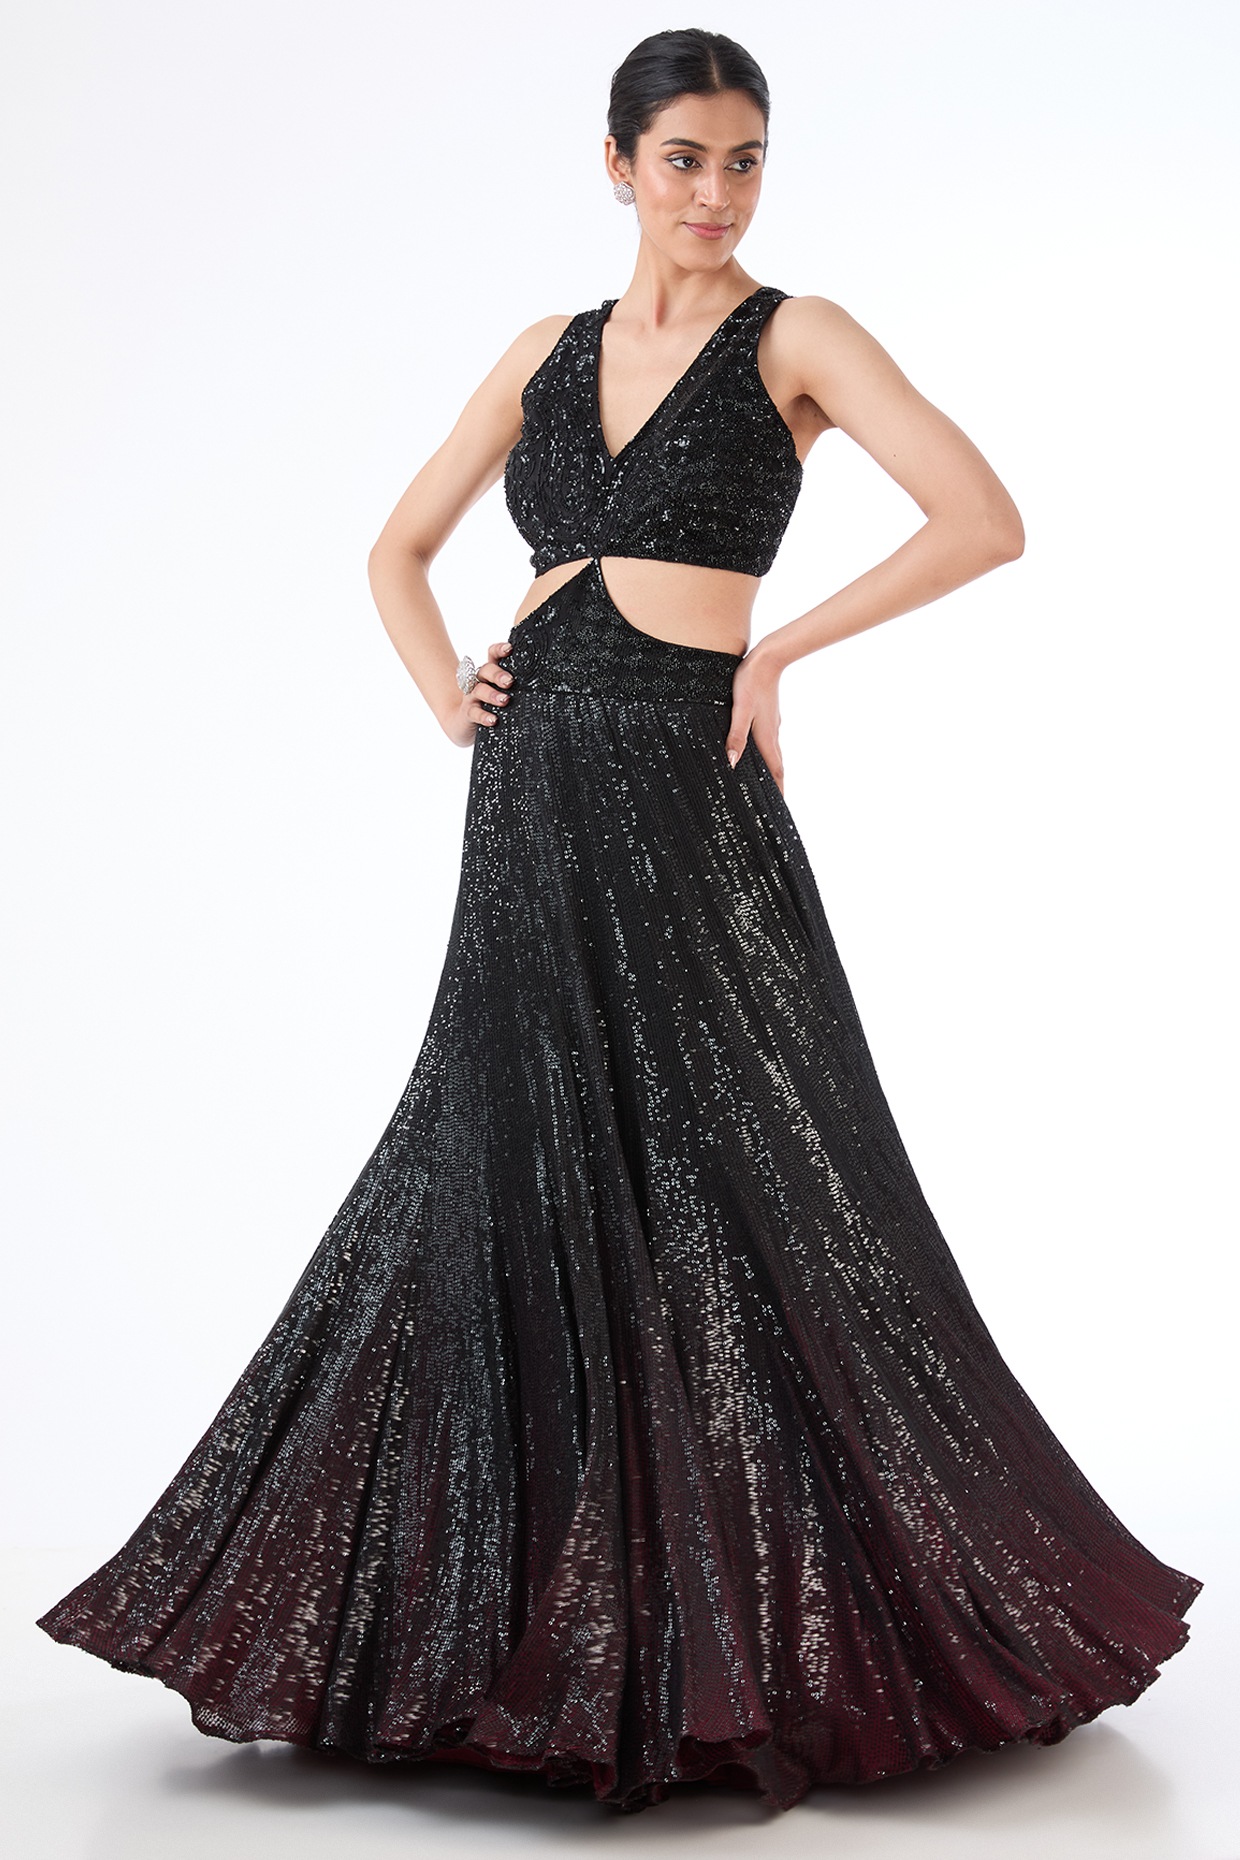 Ladies Black Gown at Rs 900 | New Items in Lanji | ID: 24208647191